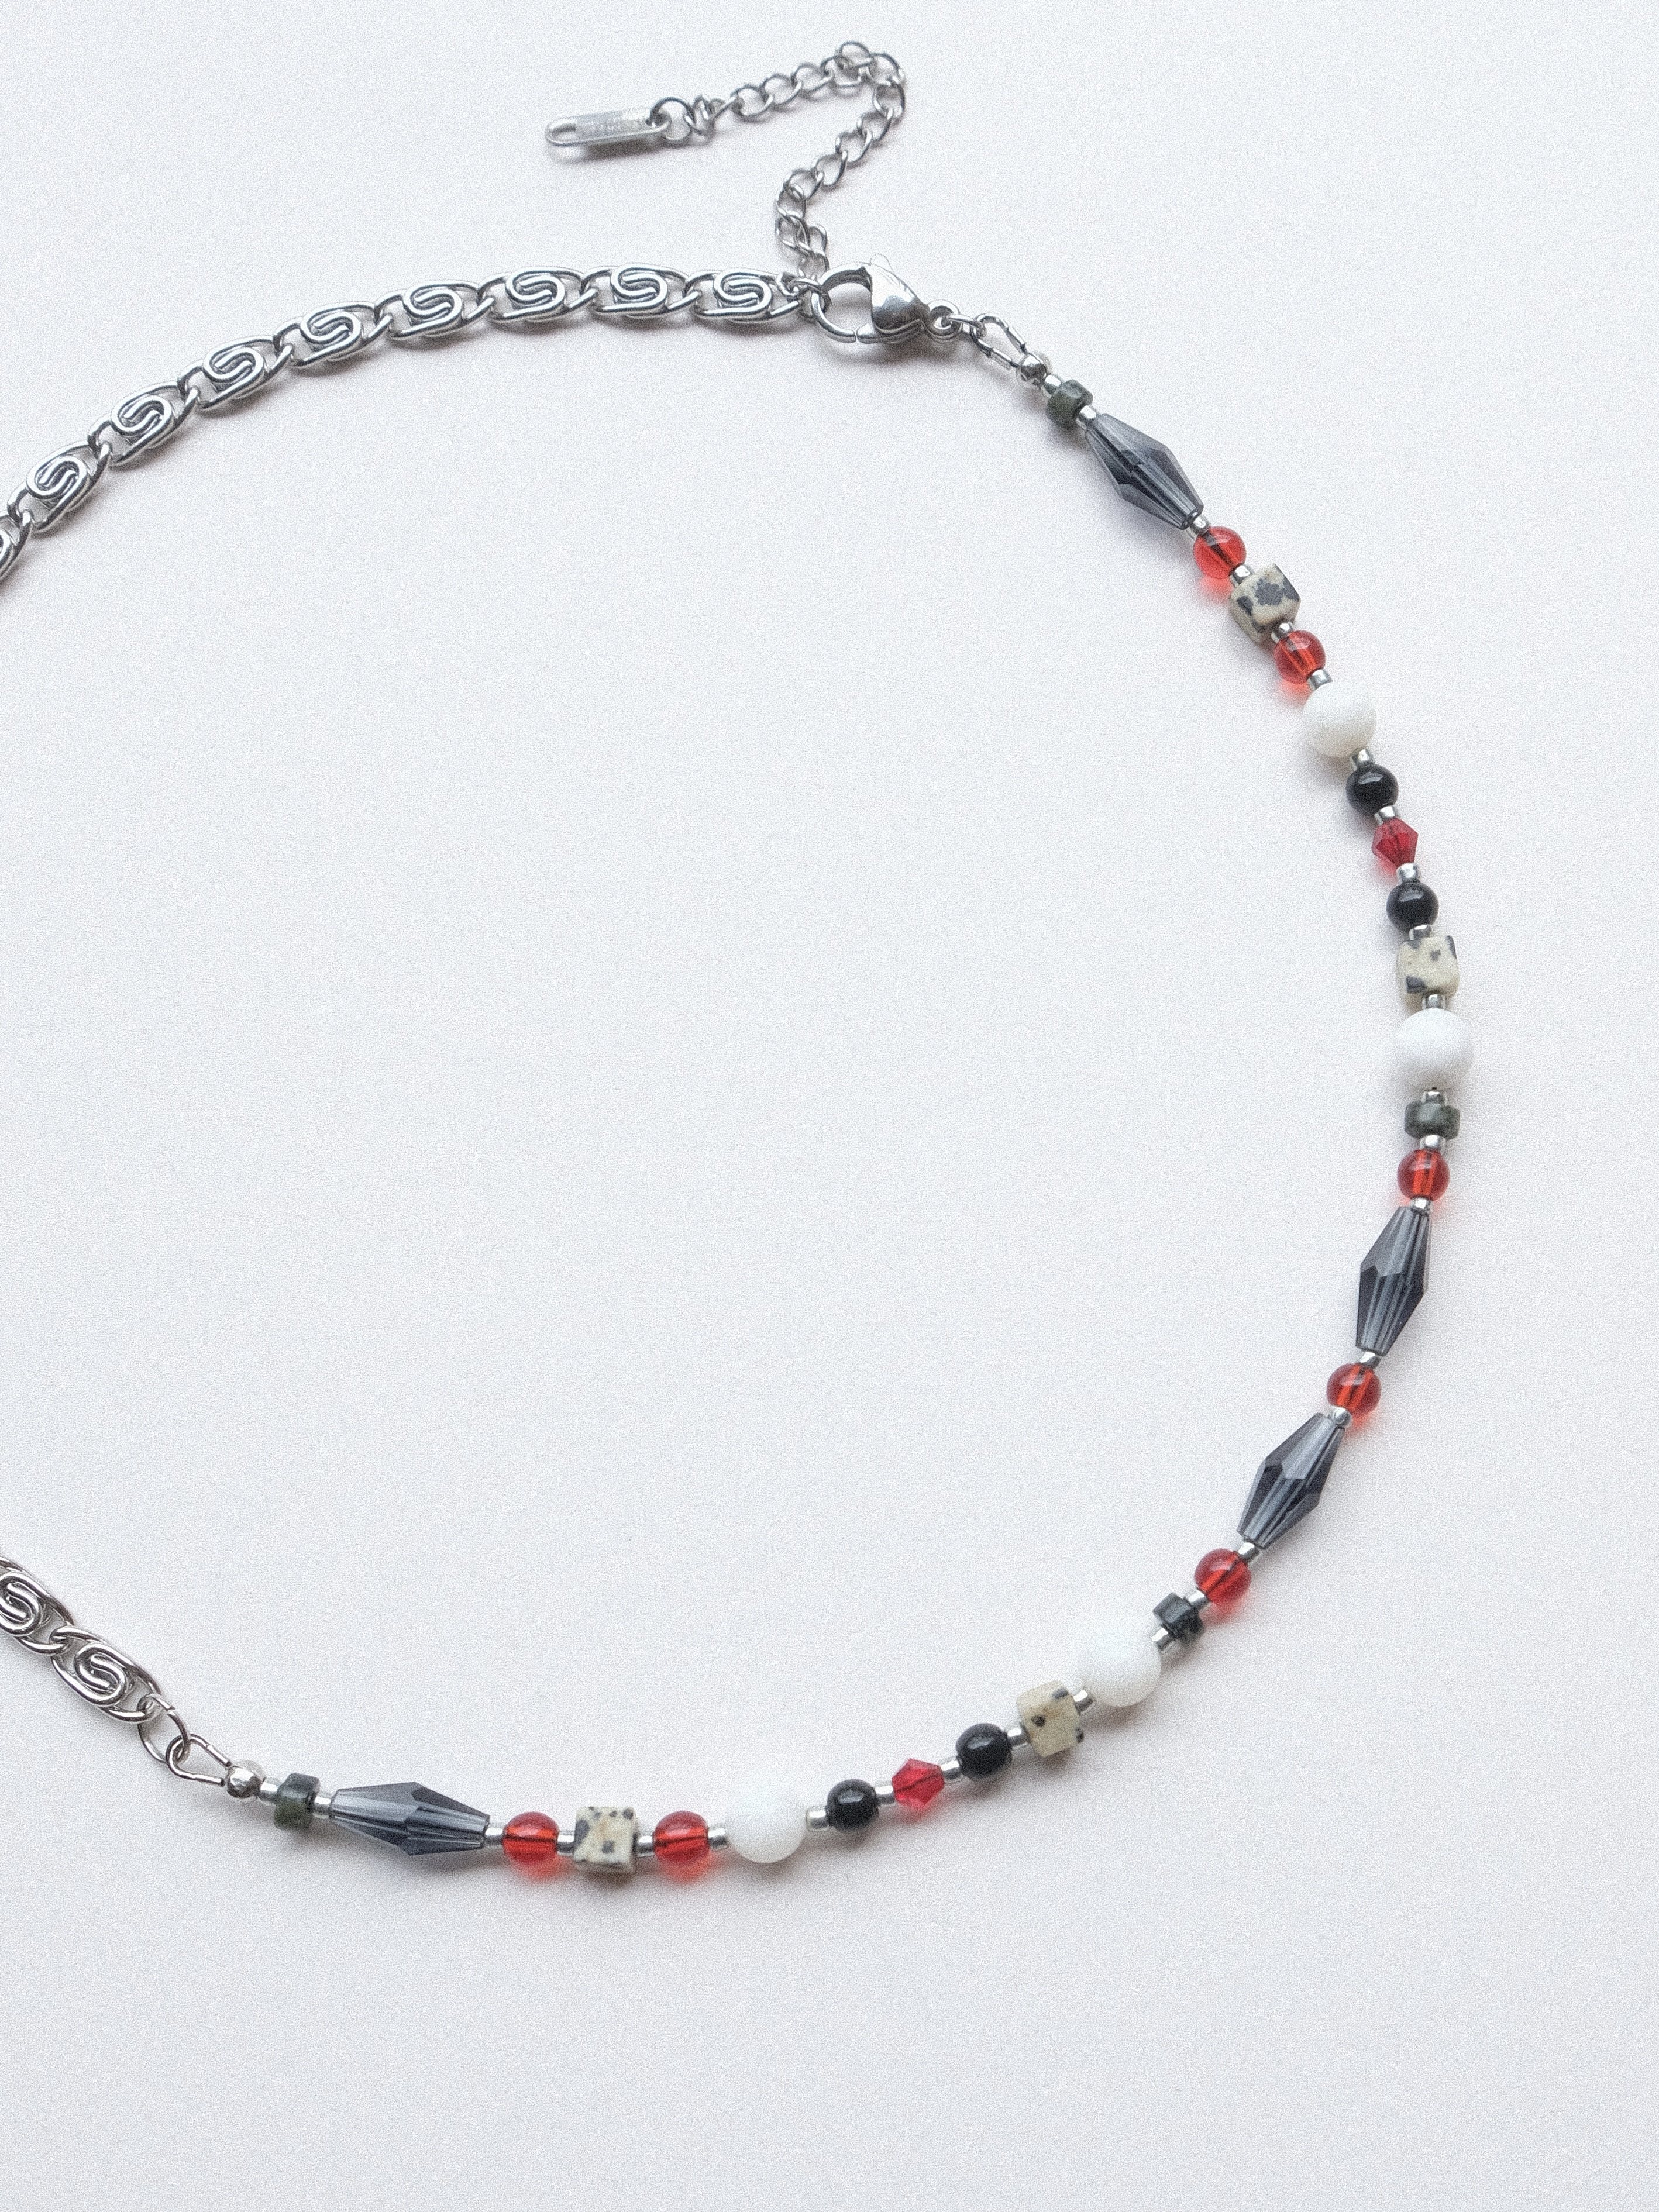 Handmade Chicago Bulls Natural Stones Glass Beads Necklace - 2